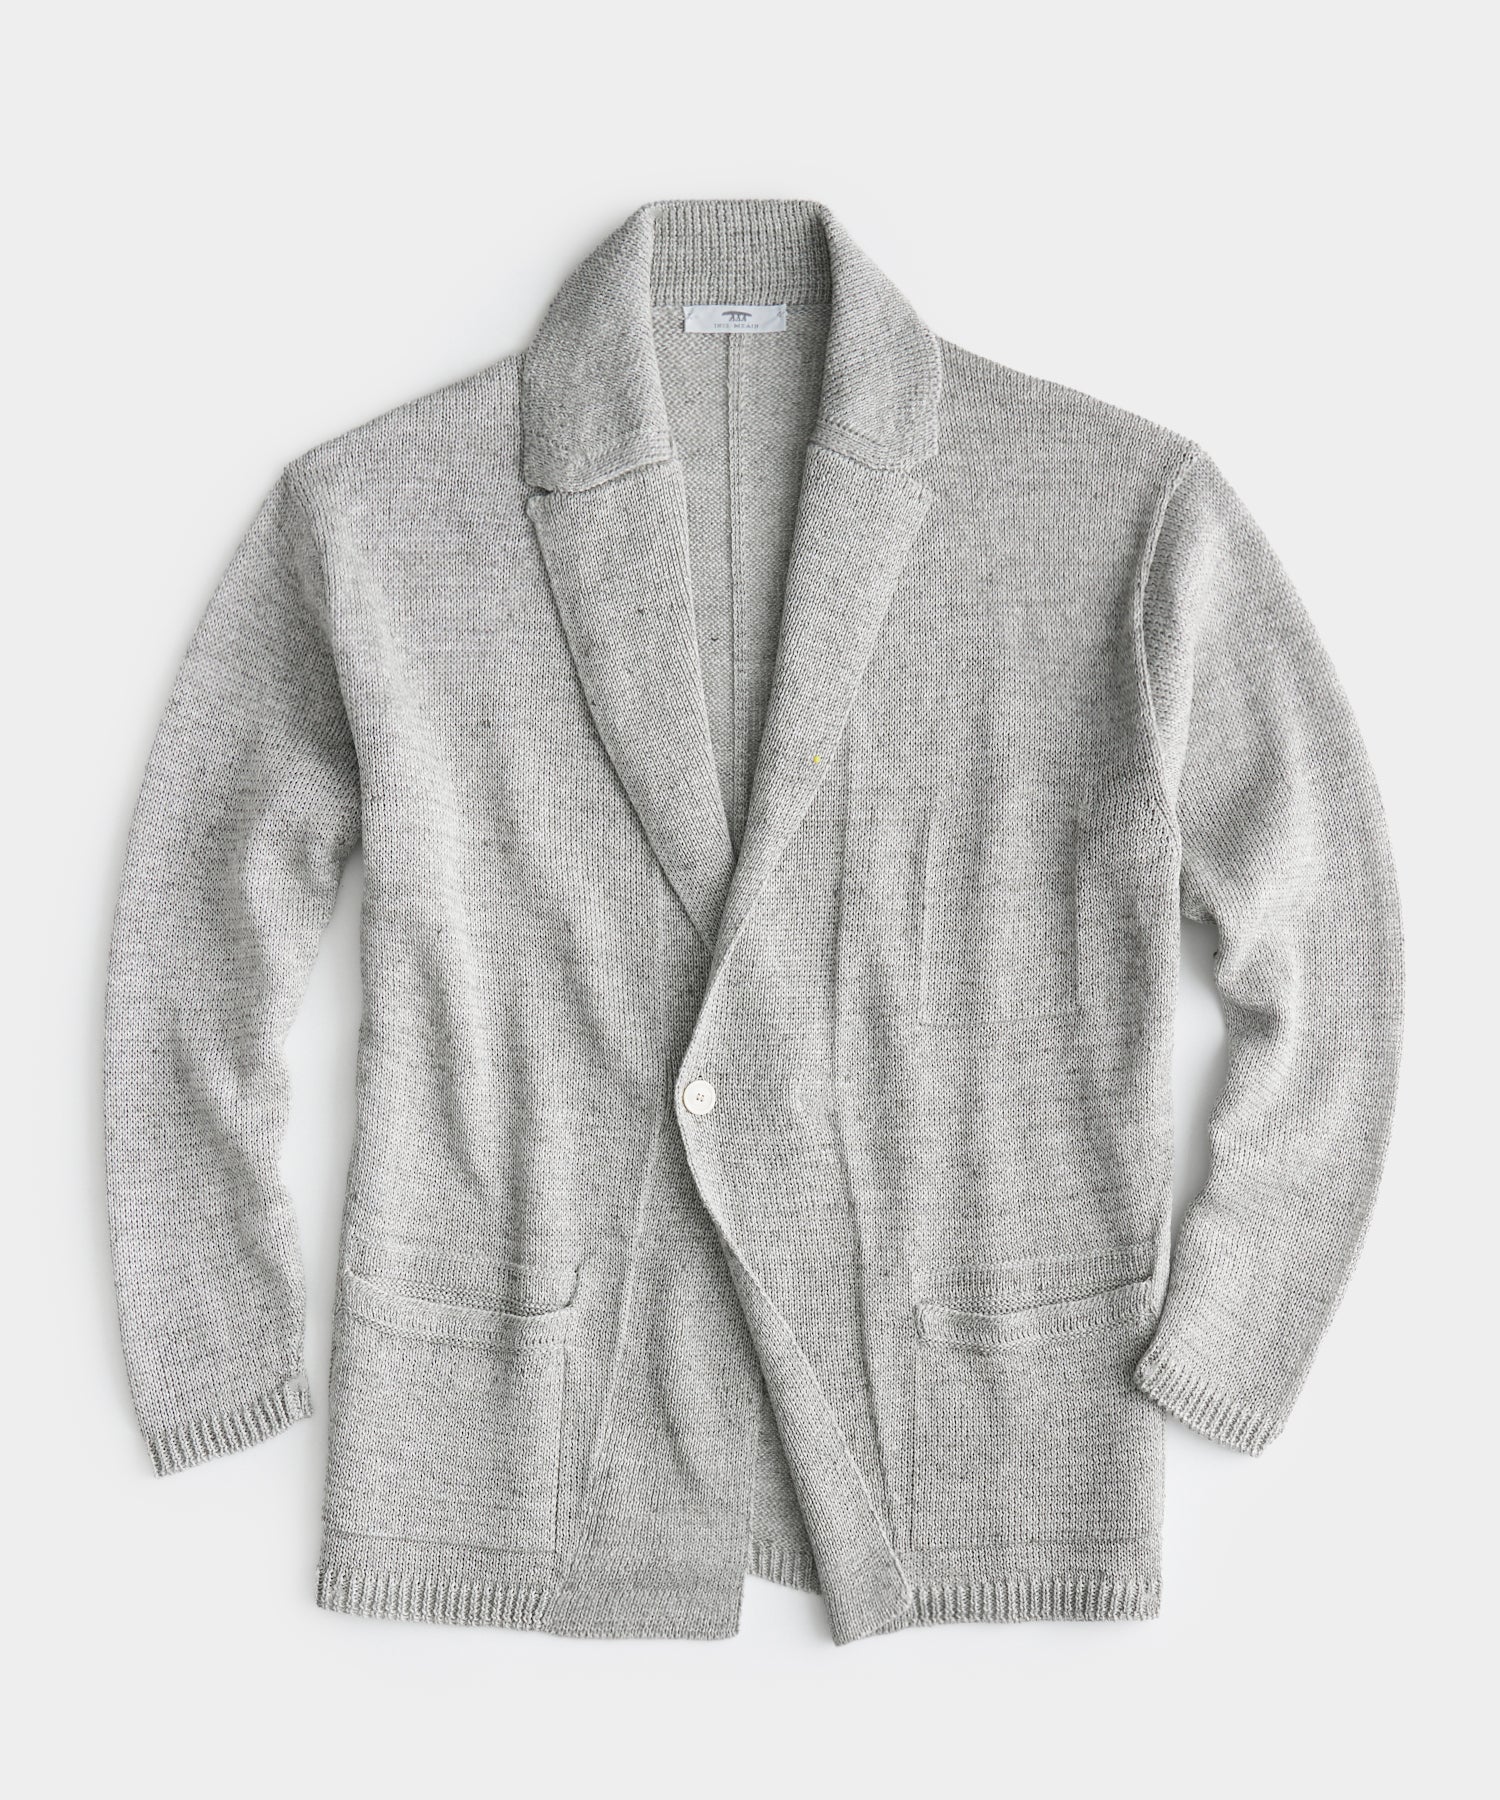 Inis Meáin Relax Jacket in Papyrus